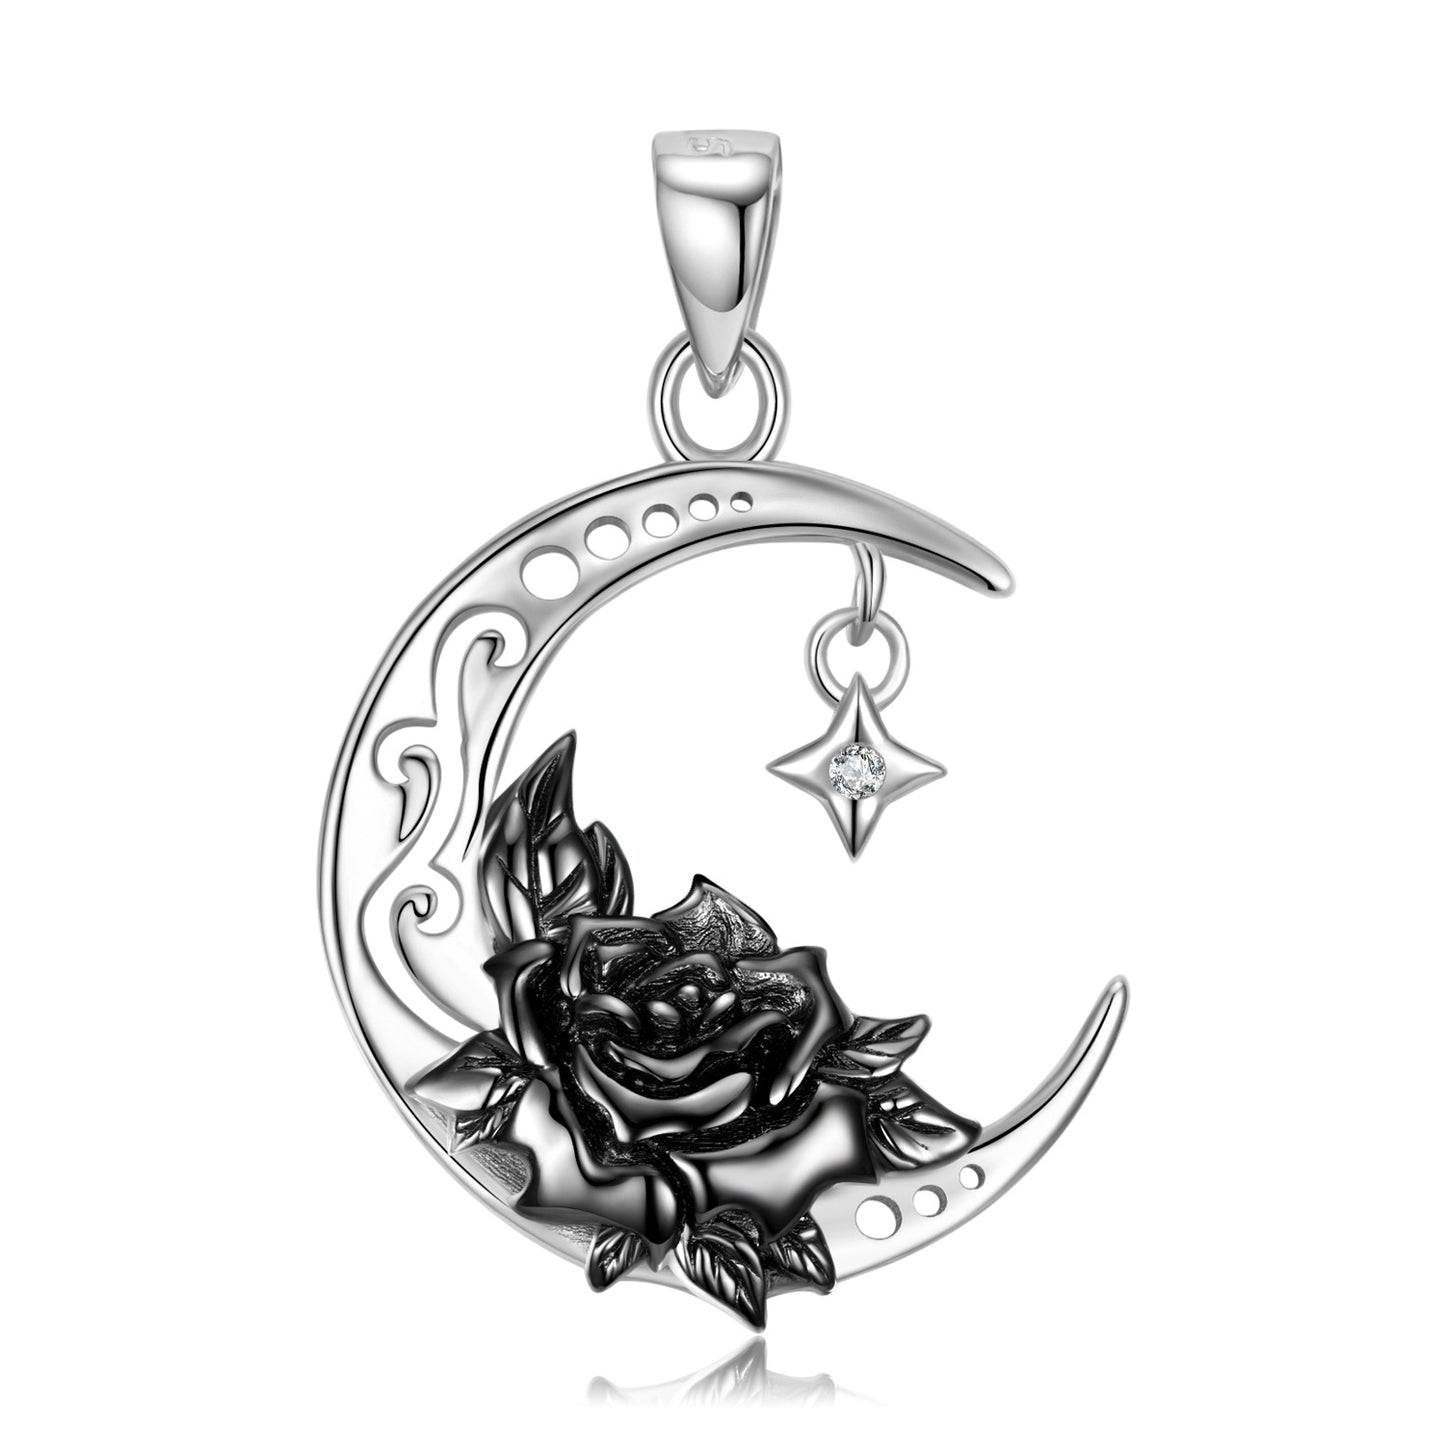 Black Water Lily Crescent Moon Pendant Silver Necklace